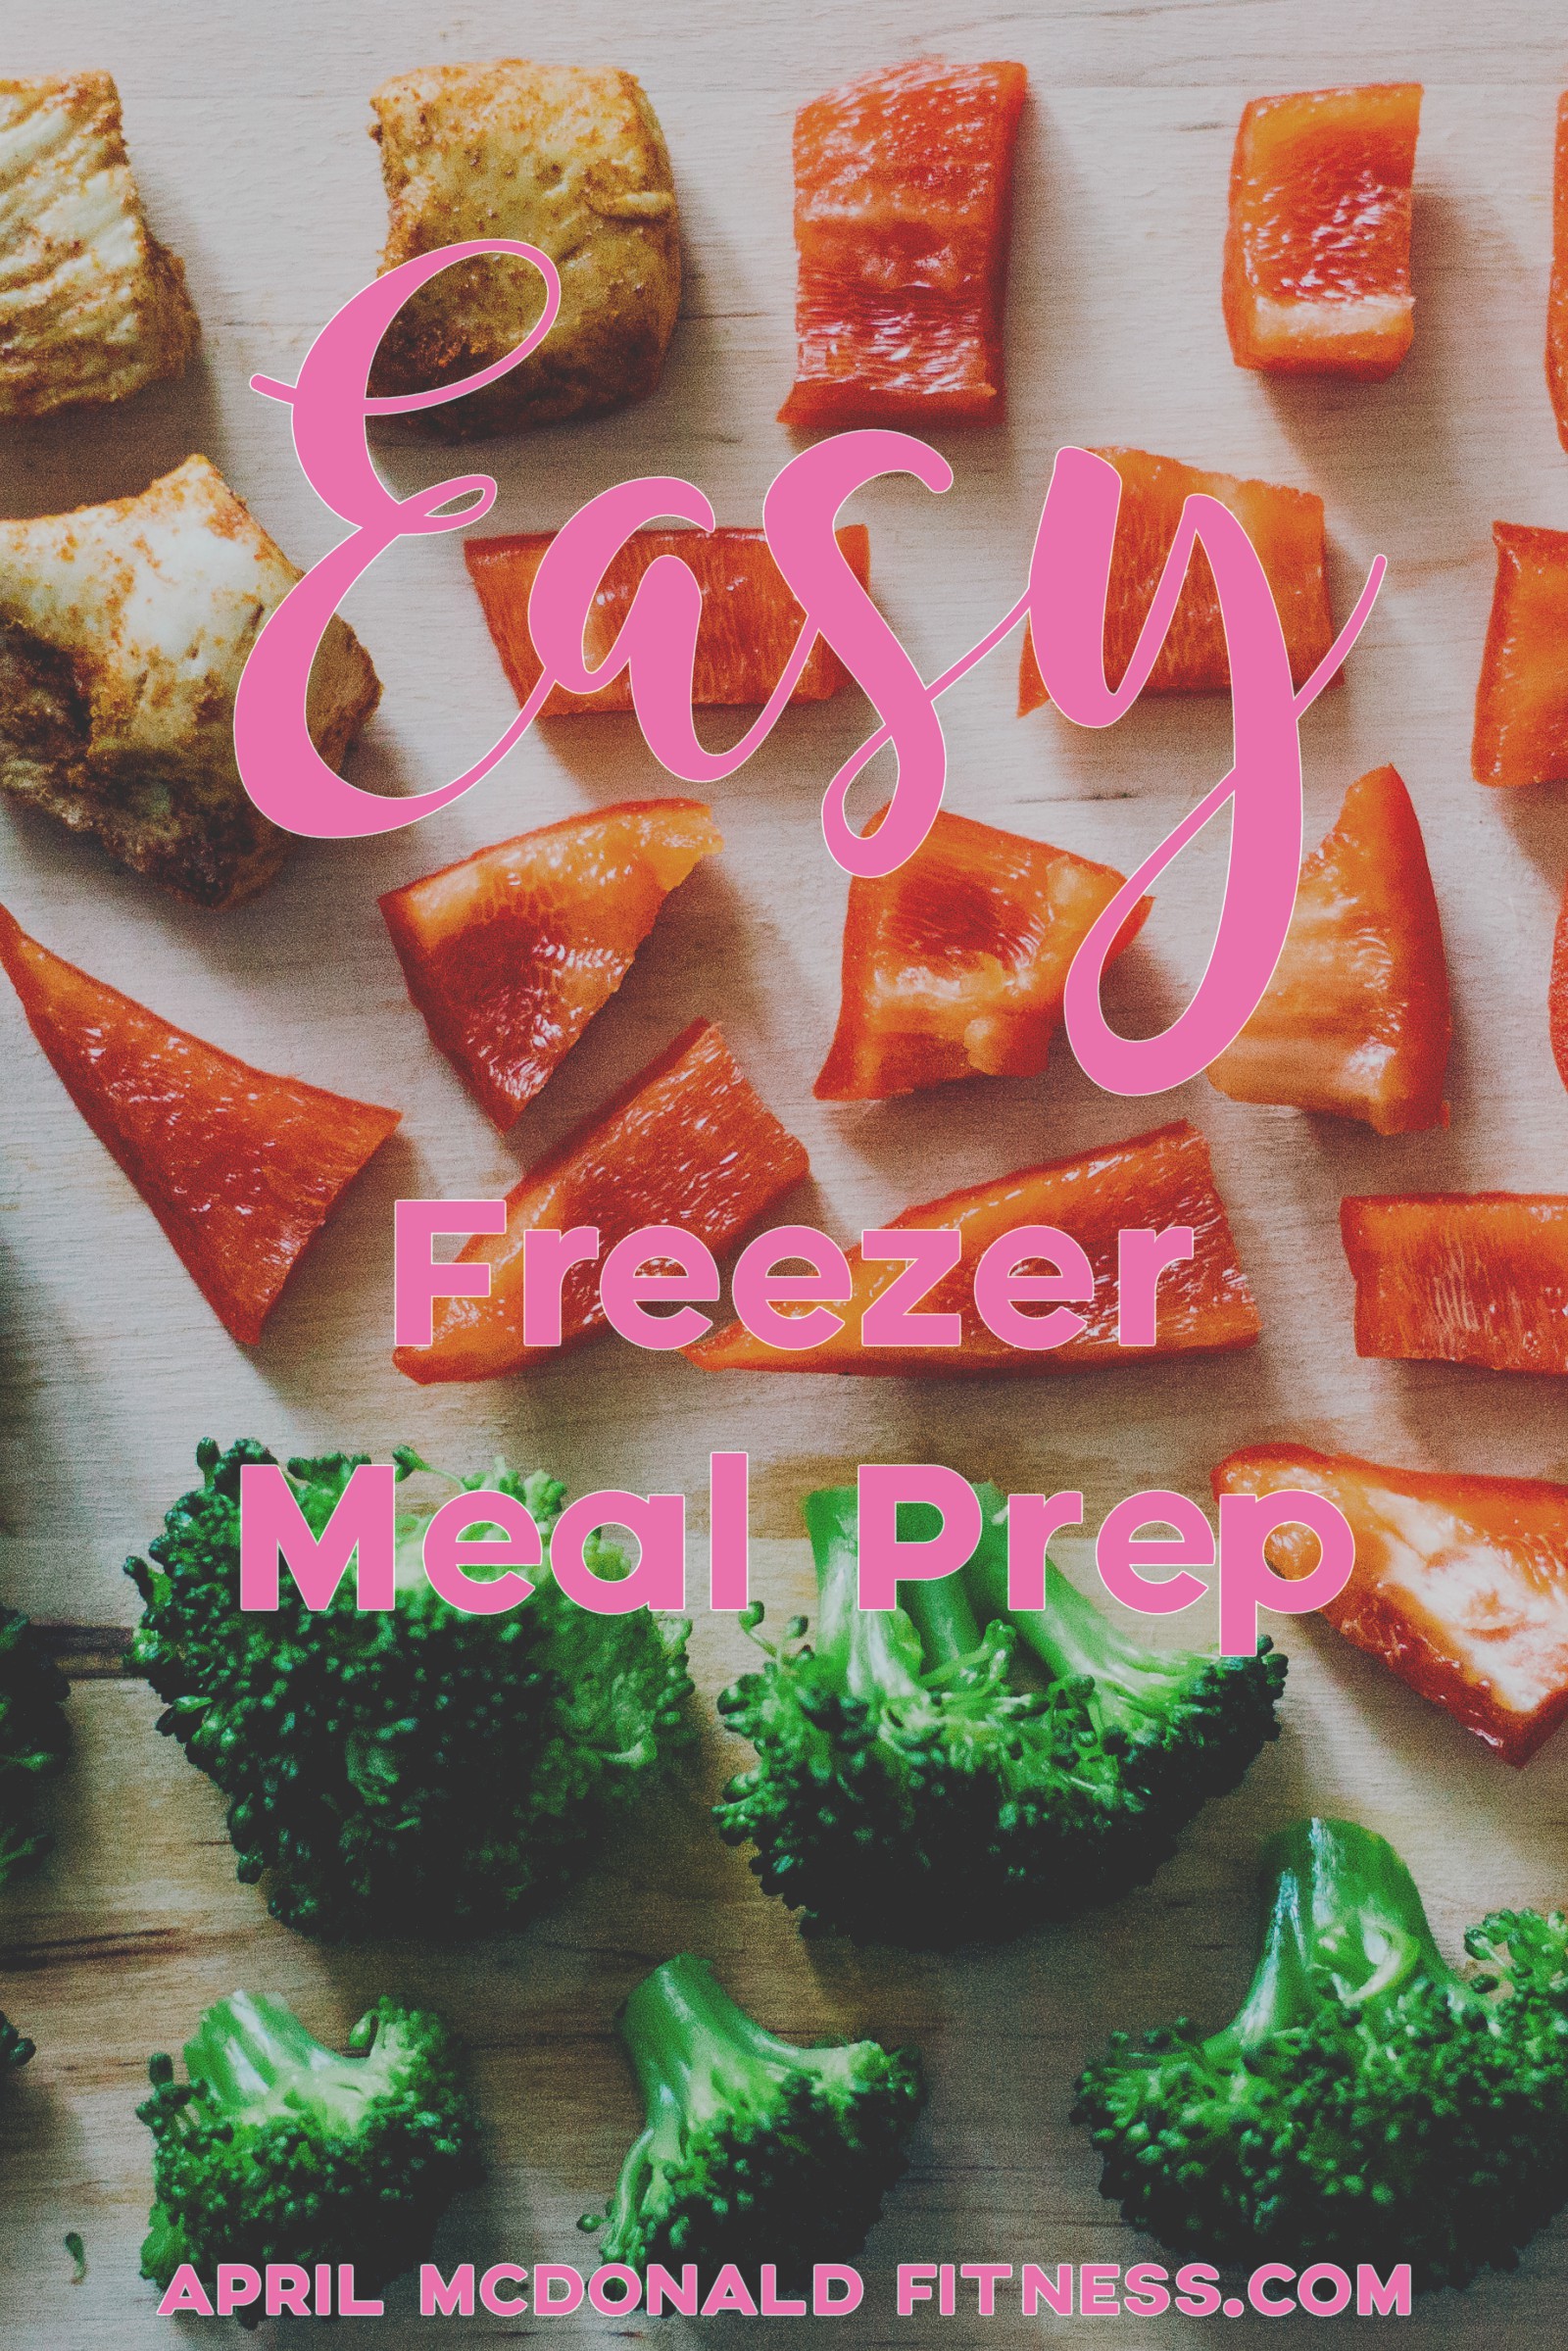 Freezer meal prep can be very easy with these simple 4 steps!